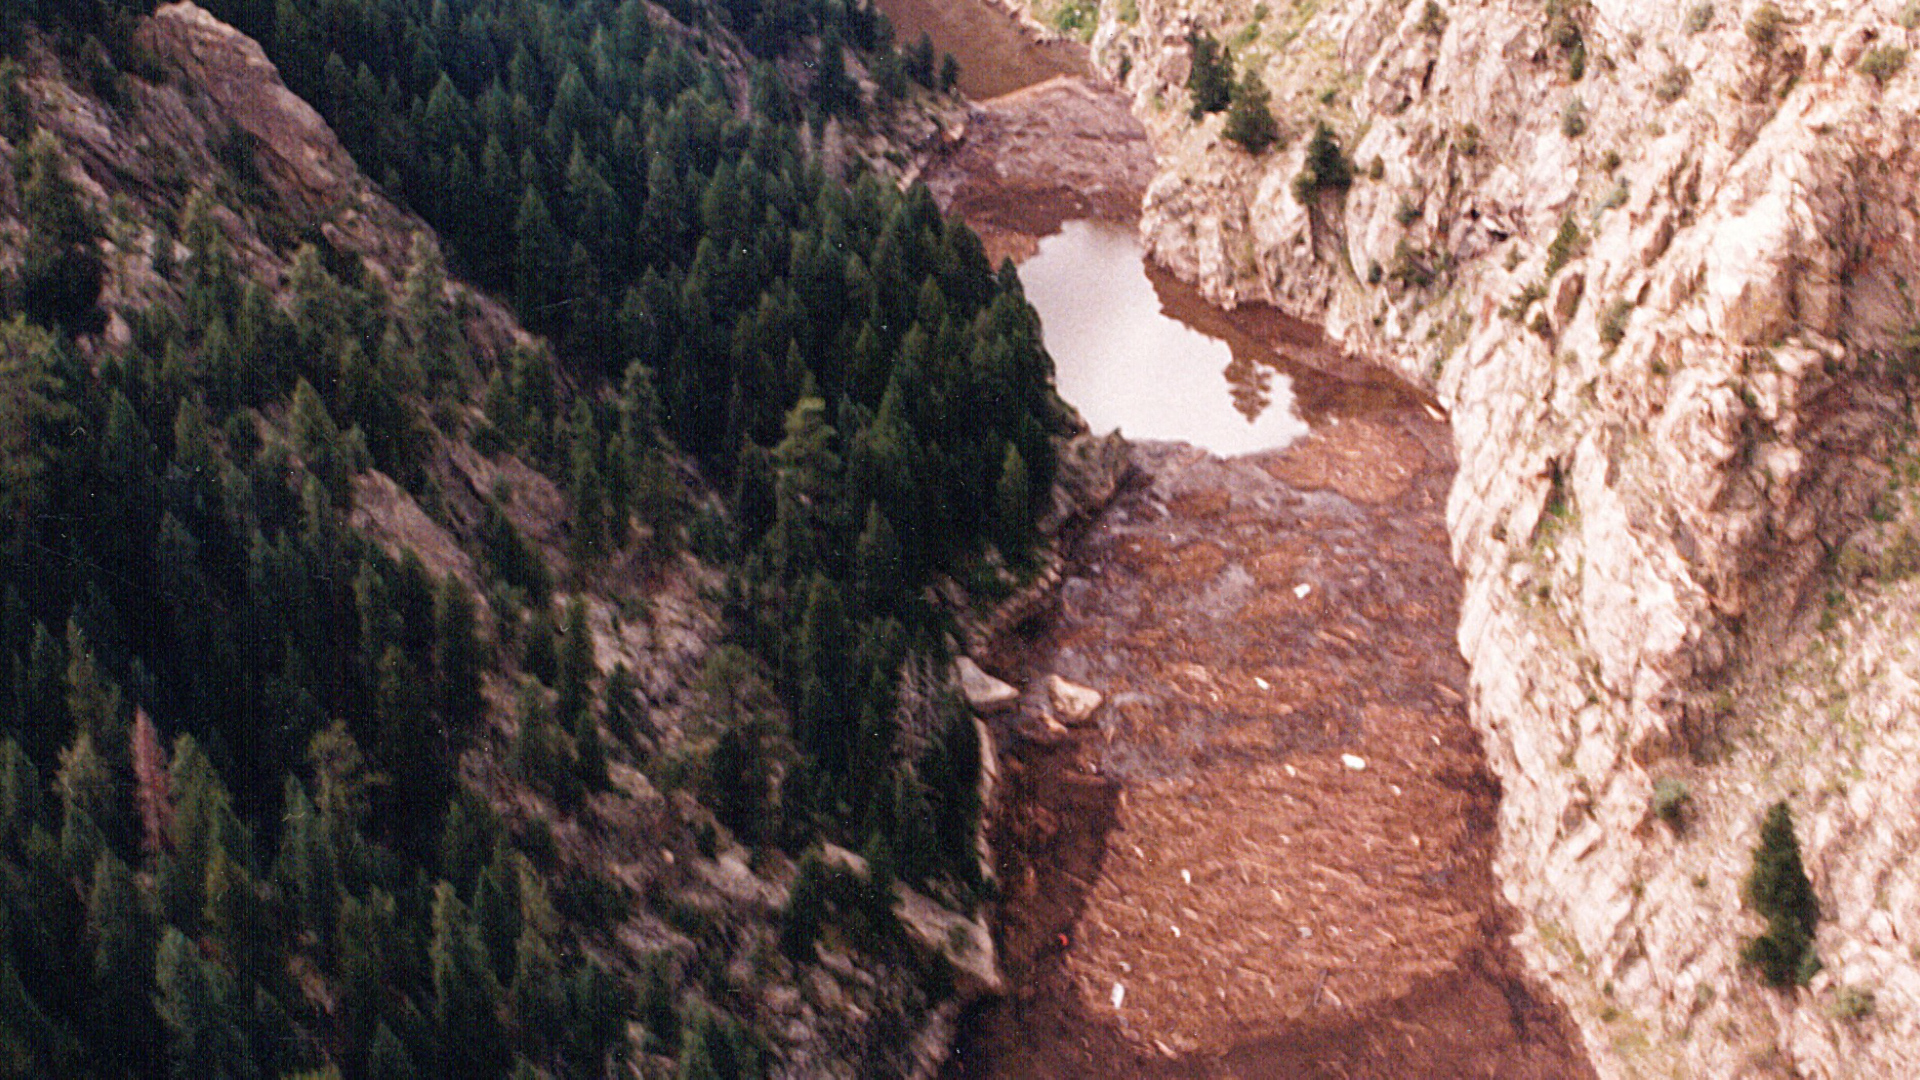 Debris washed into Strontia Springs Reservoir in 1996 after the Buffalo Creek Wildfire.